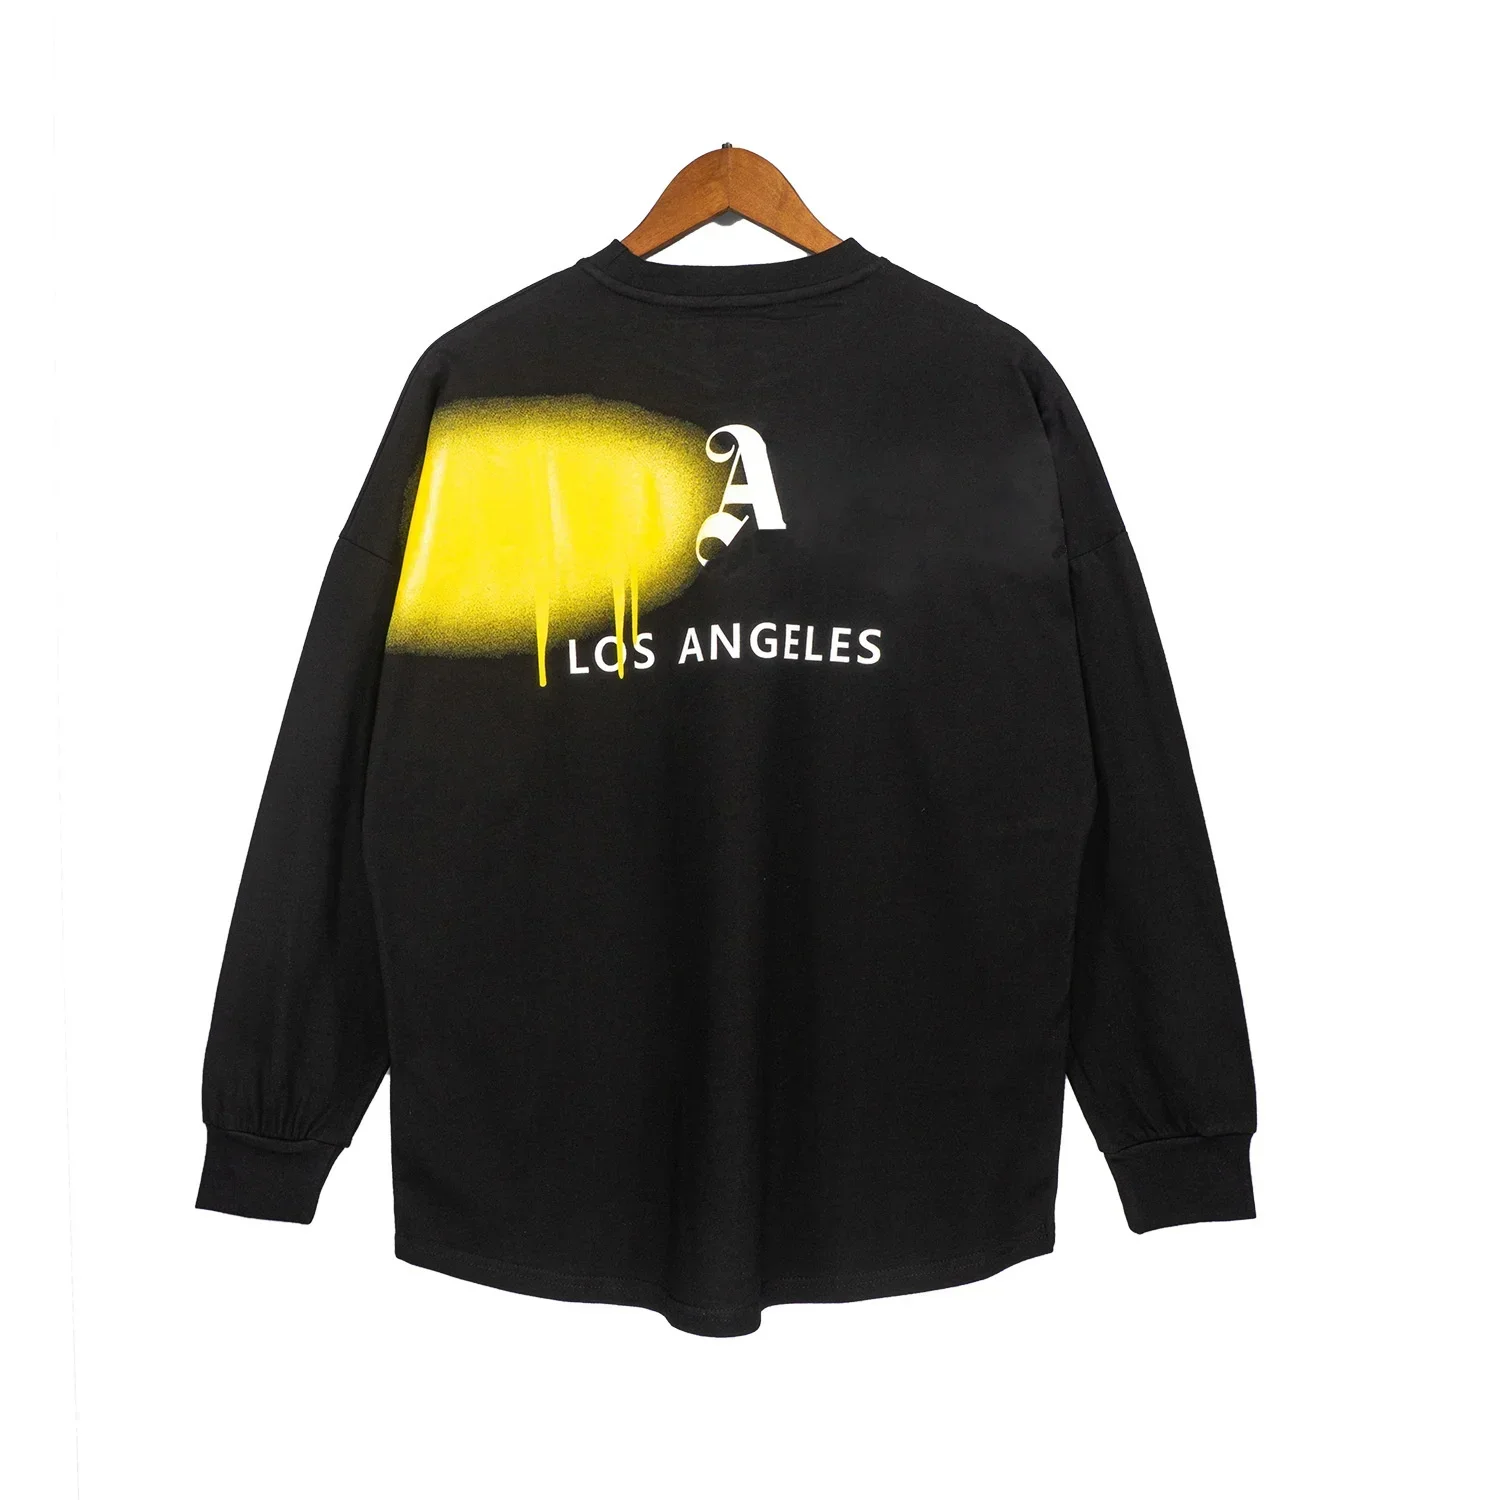 

Palm ANGEL Letter loose casual Fashion graffiti casual cotton round neck black cartoon animation Top Long Sleeve T-Shirt